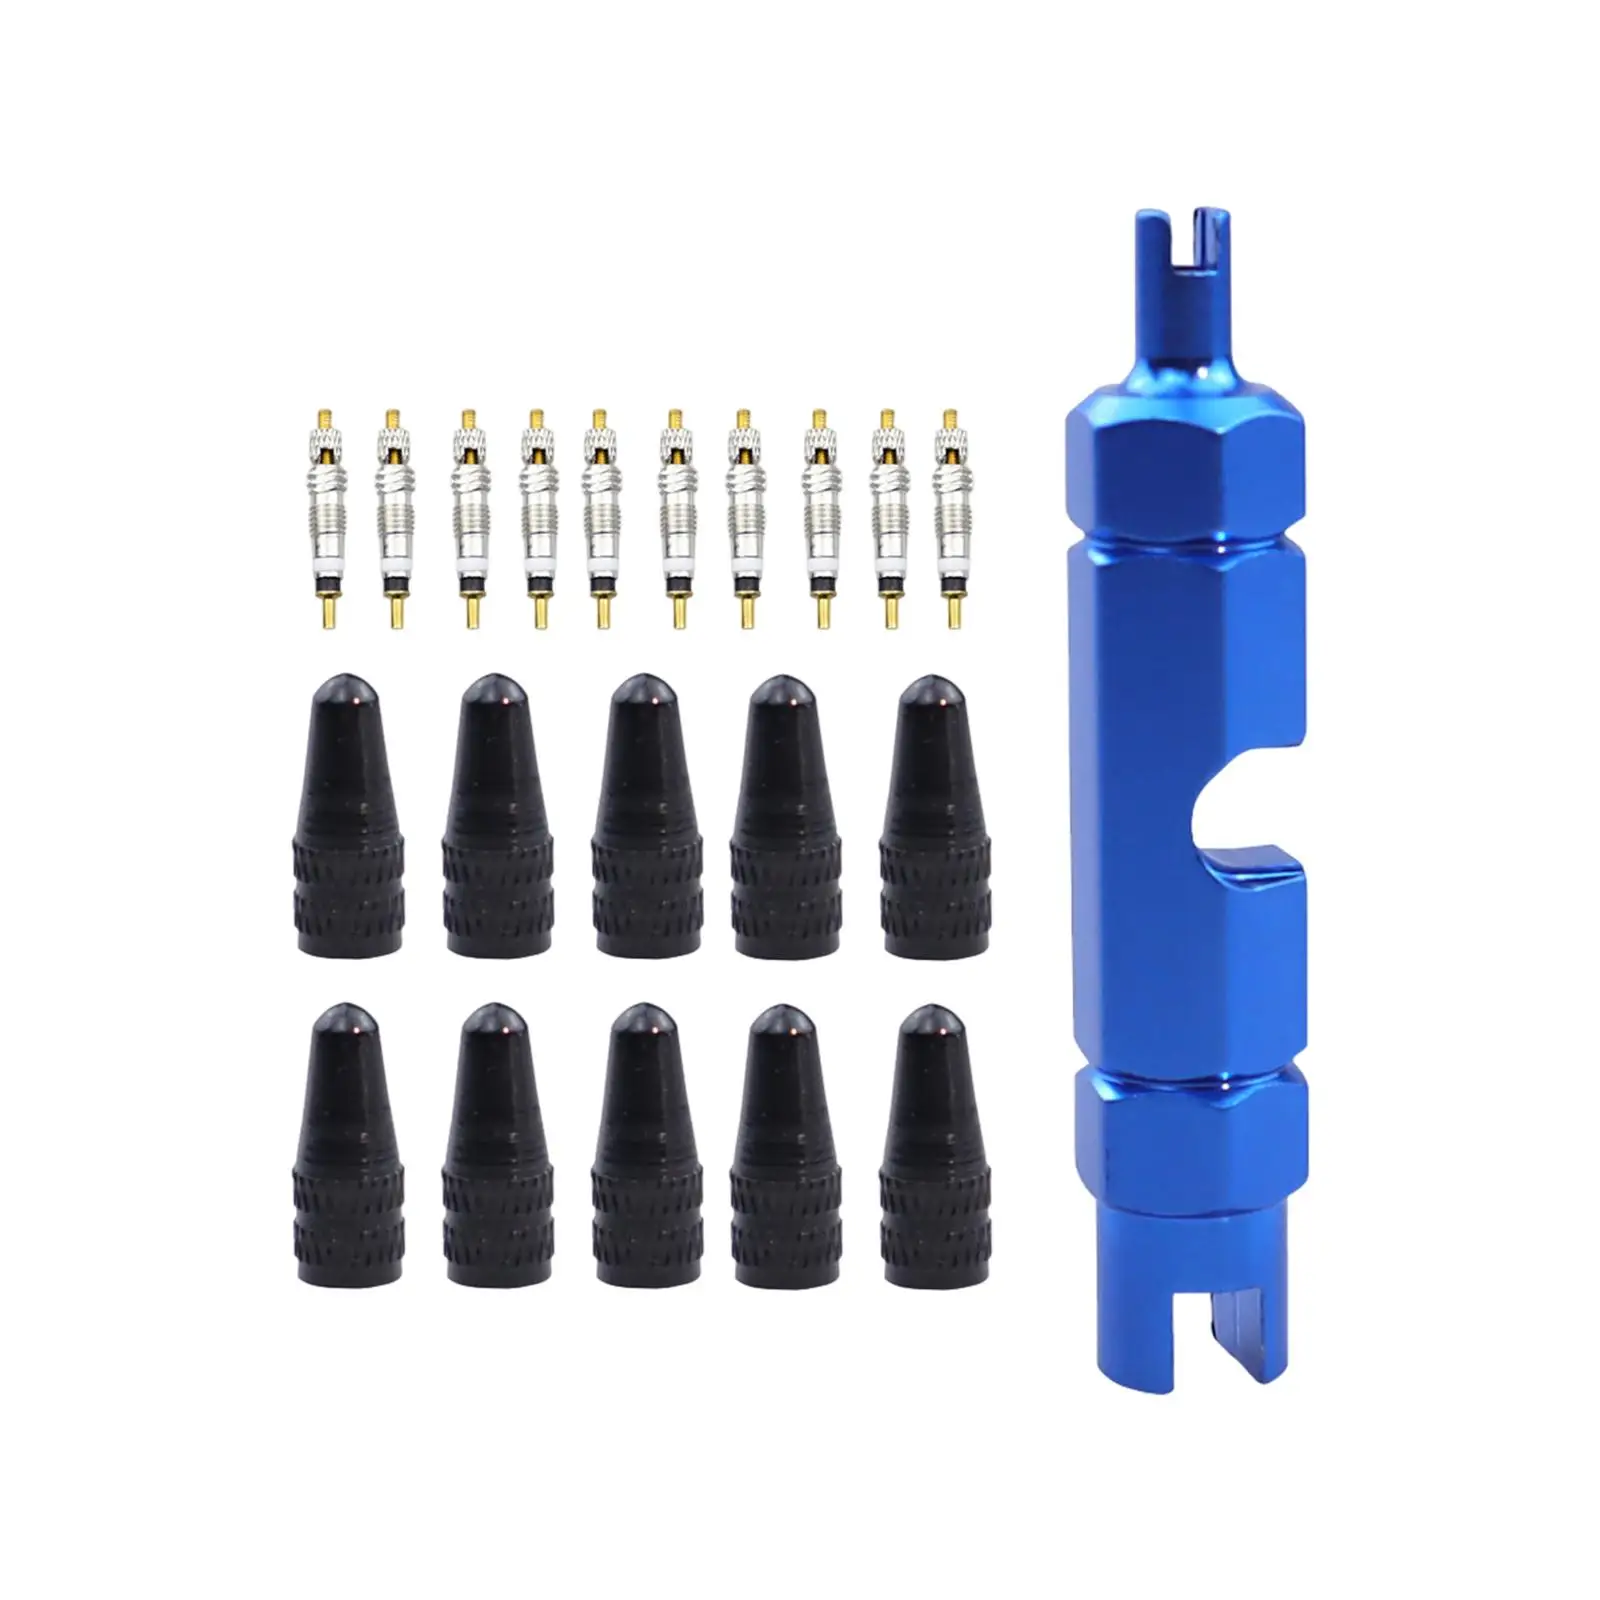 Tire Valve Stem Puller Tools Set Sturdy Practical Professional for Car, Bicycle, RV, ATV Tire Repair Tool Valve Core Wrench